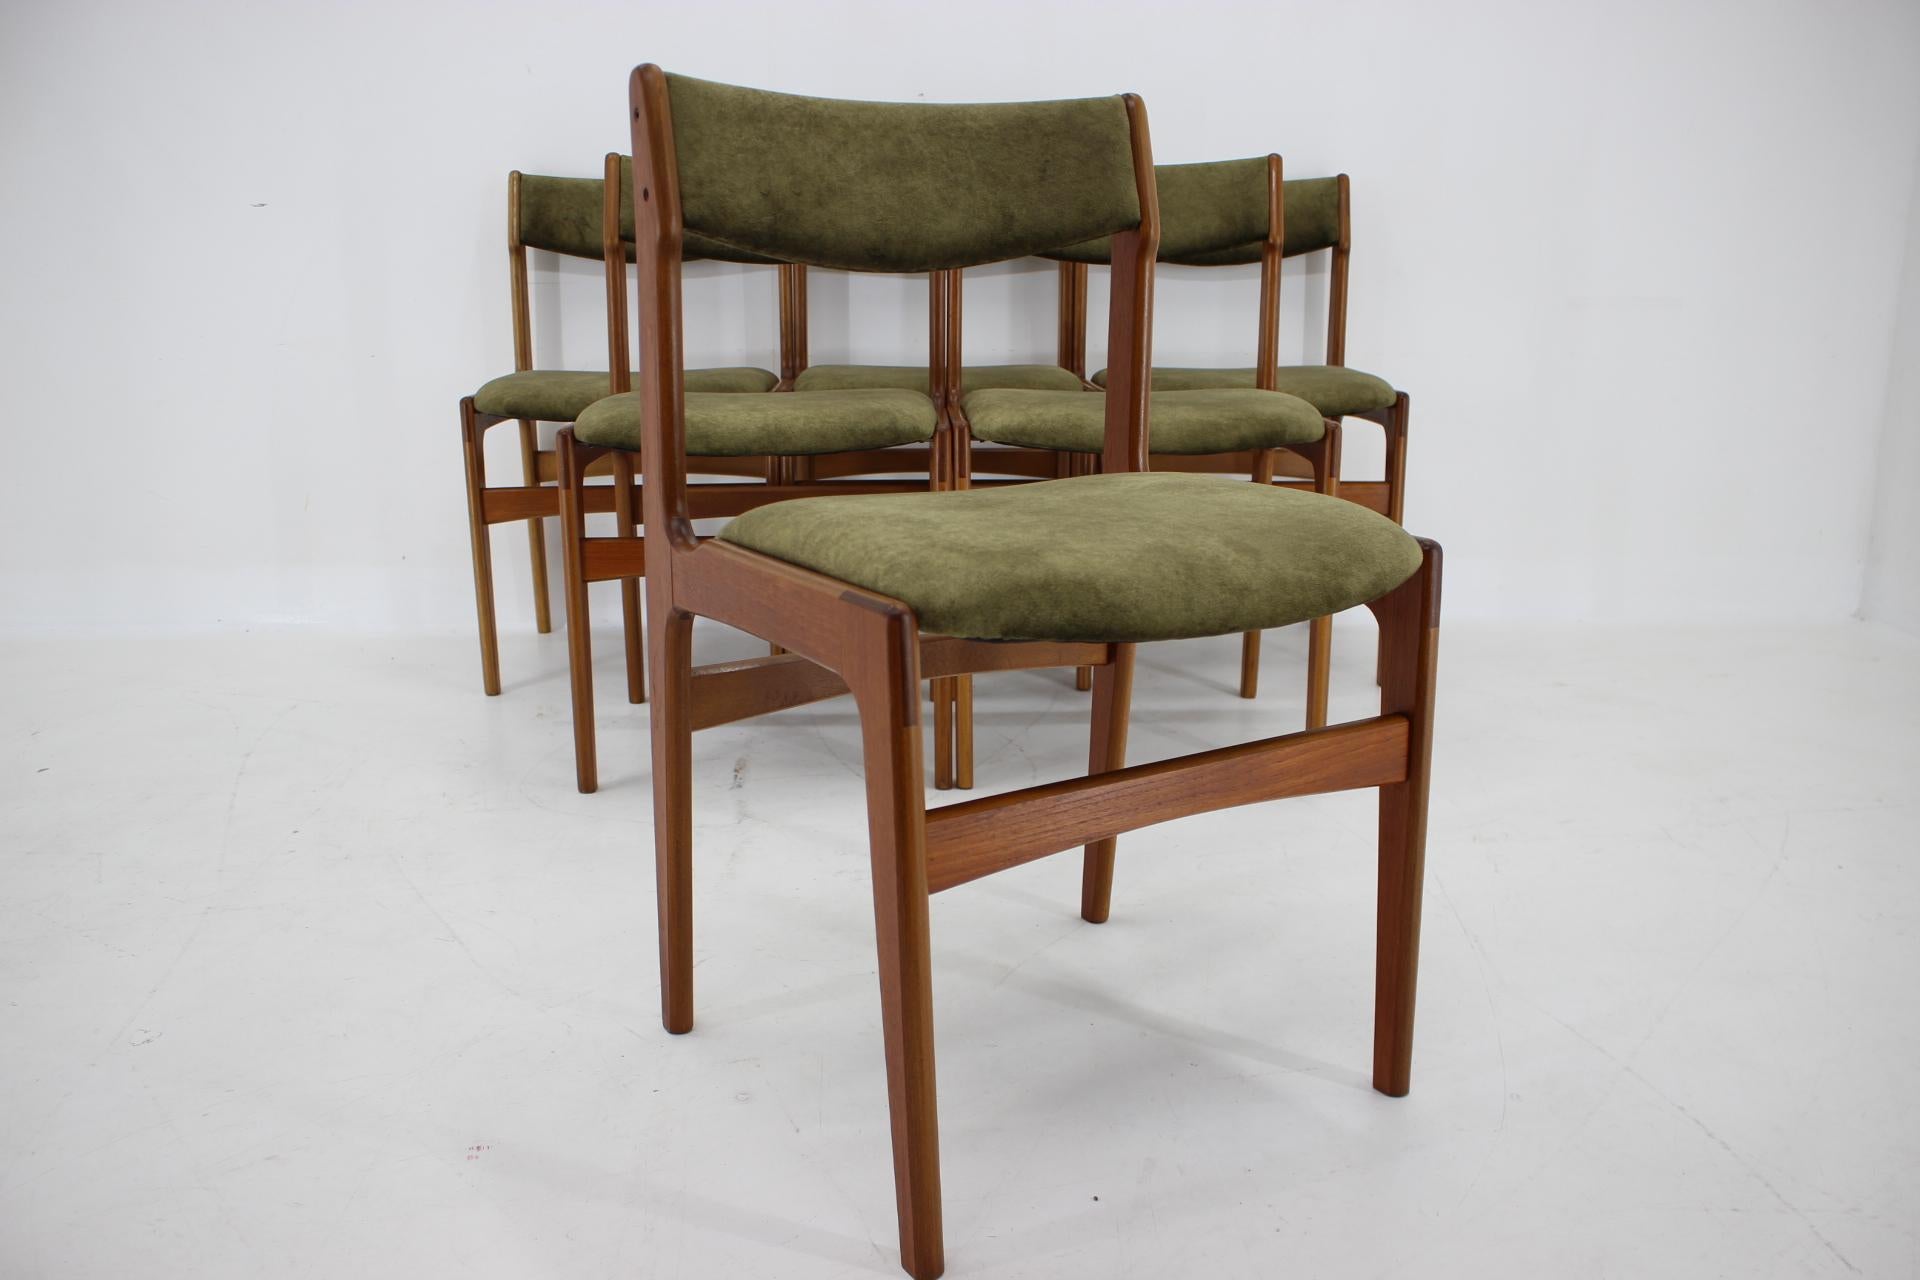 Mid-20th Century 1960s Danish Teak Dining Chairs, Set of 6 For Sale